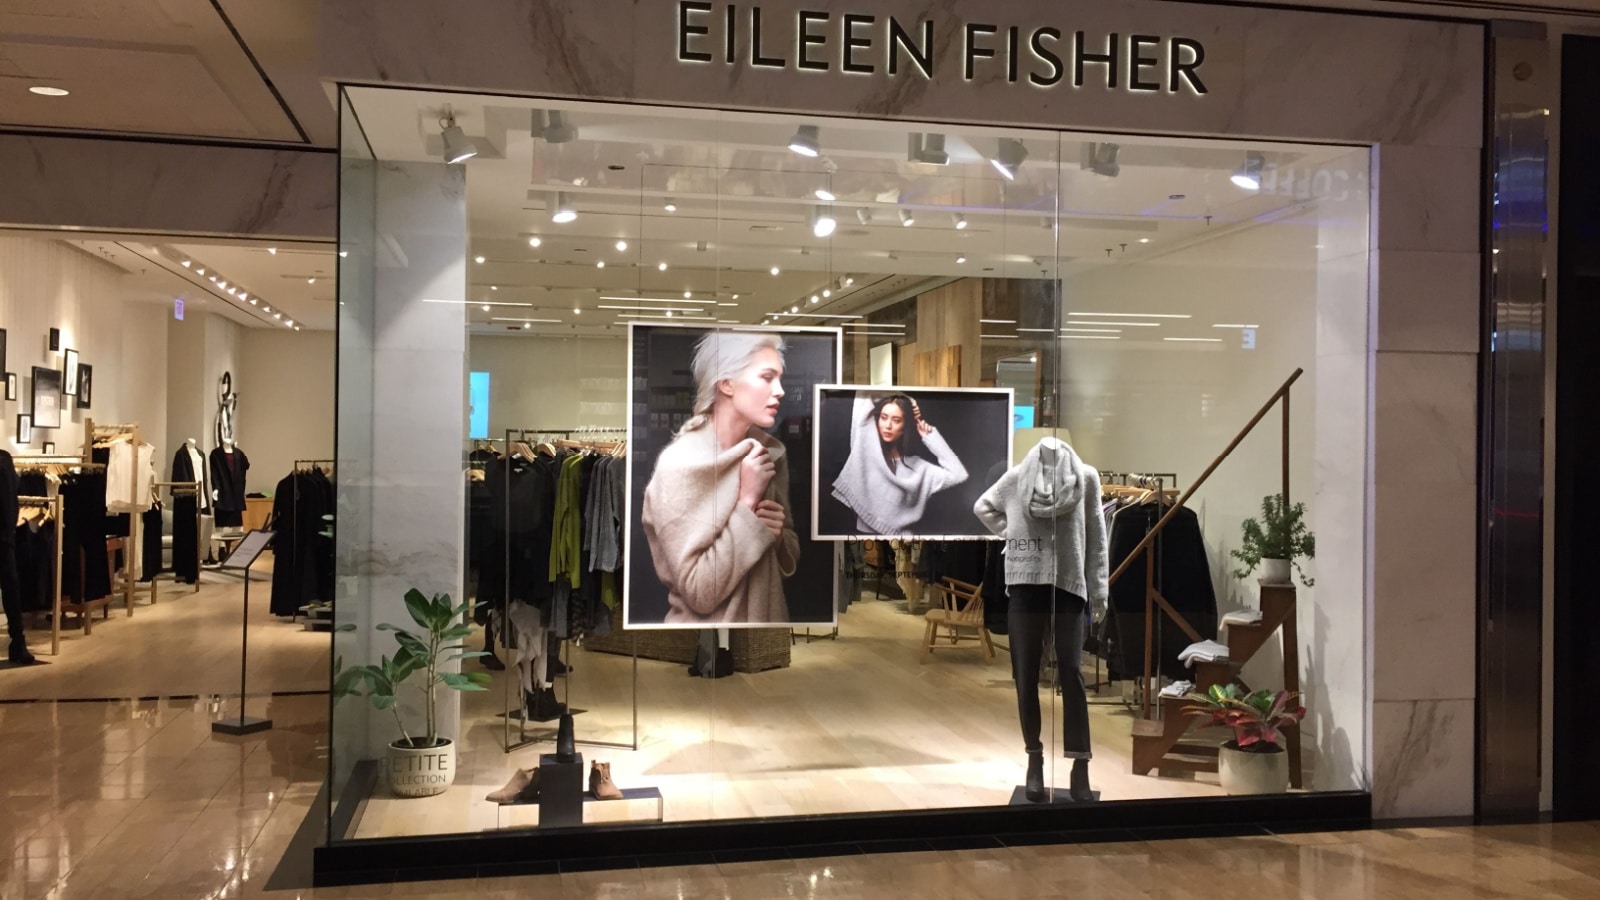 Chicago, Illinois - September 24, 2015 - Eileen Fisher store in the Water Tower Place shopping mall on Chicago's Michigan Avenue